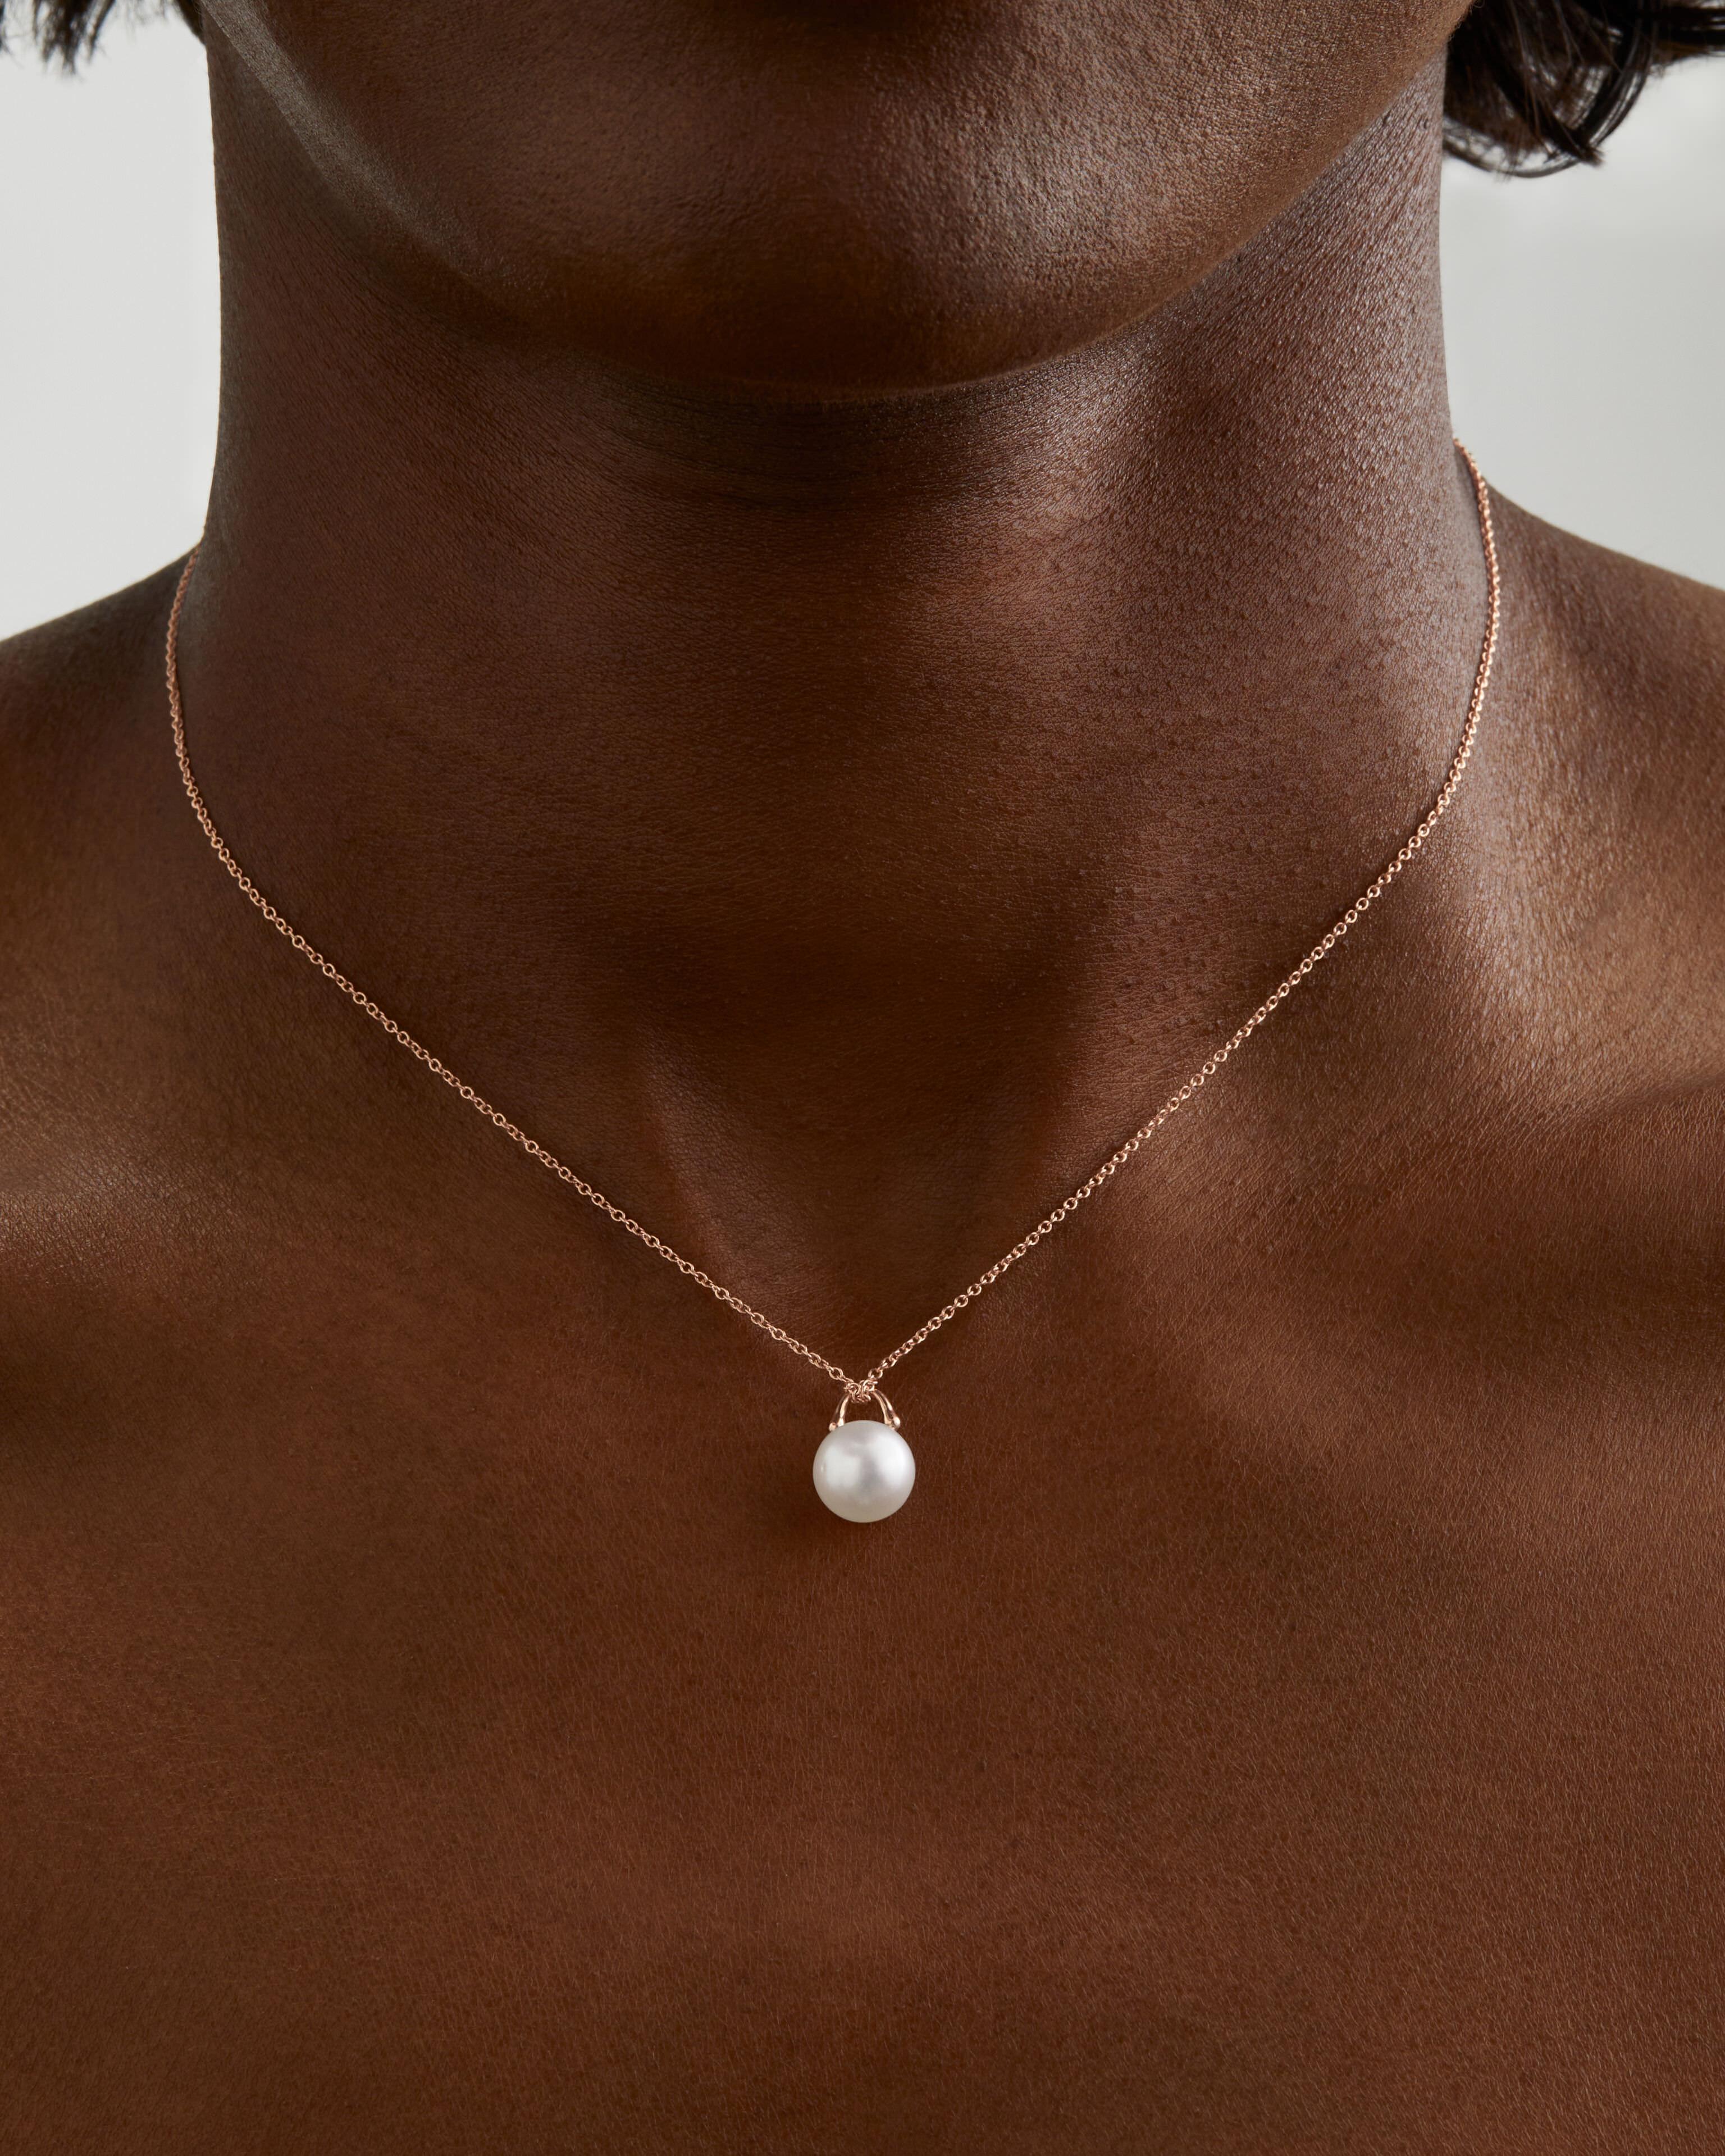 This unique pearl pendant by Roseate Jewelry features a single natural color round 12mm Austrailian South Sea pearl pendant framed in a setting with the structure of a padlock and the fluidity of water drops. Suspended from a delicate 18k rose gold